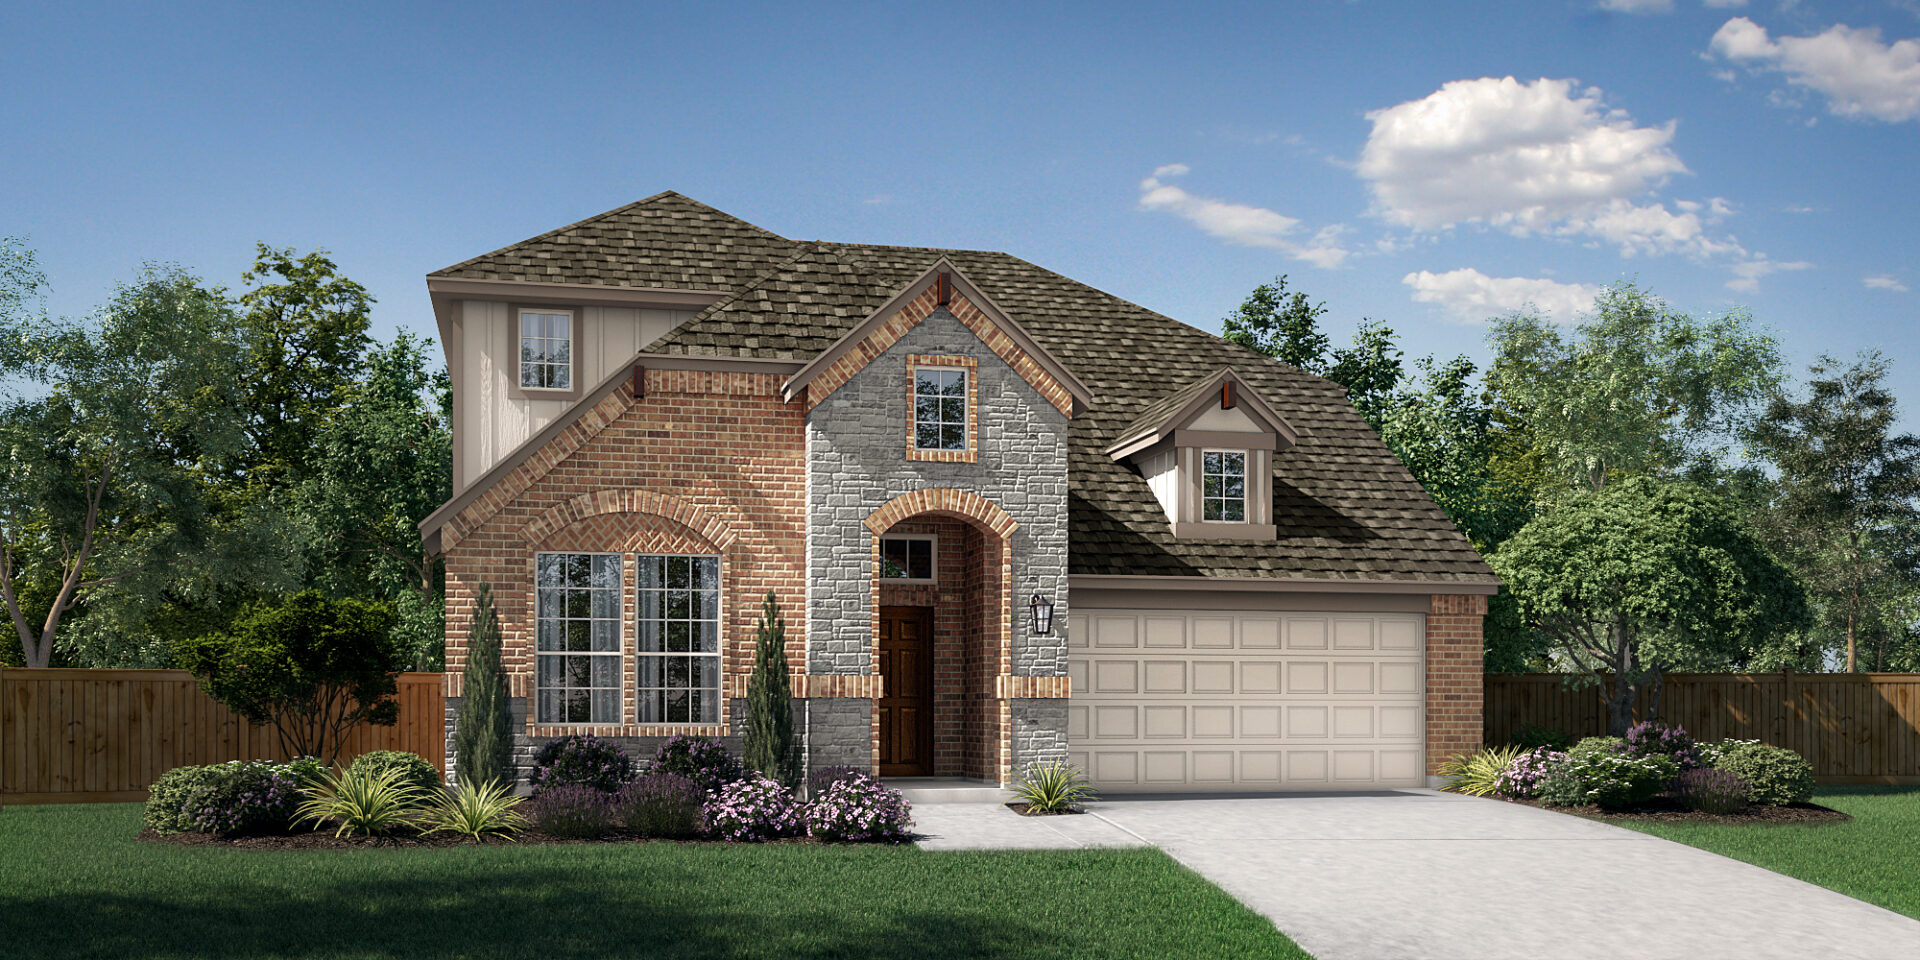  Sutton Fields - Join our VIP Interest List! New Homes in Celina